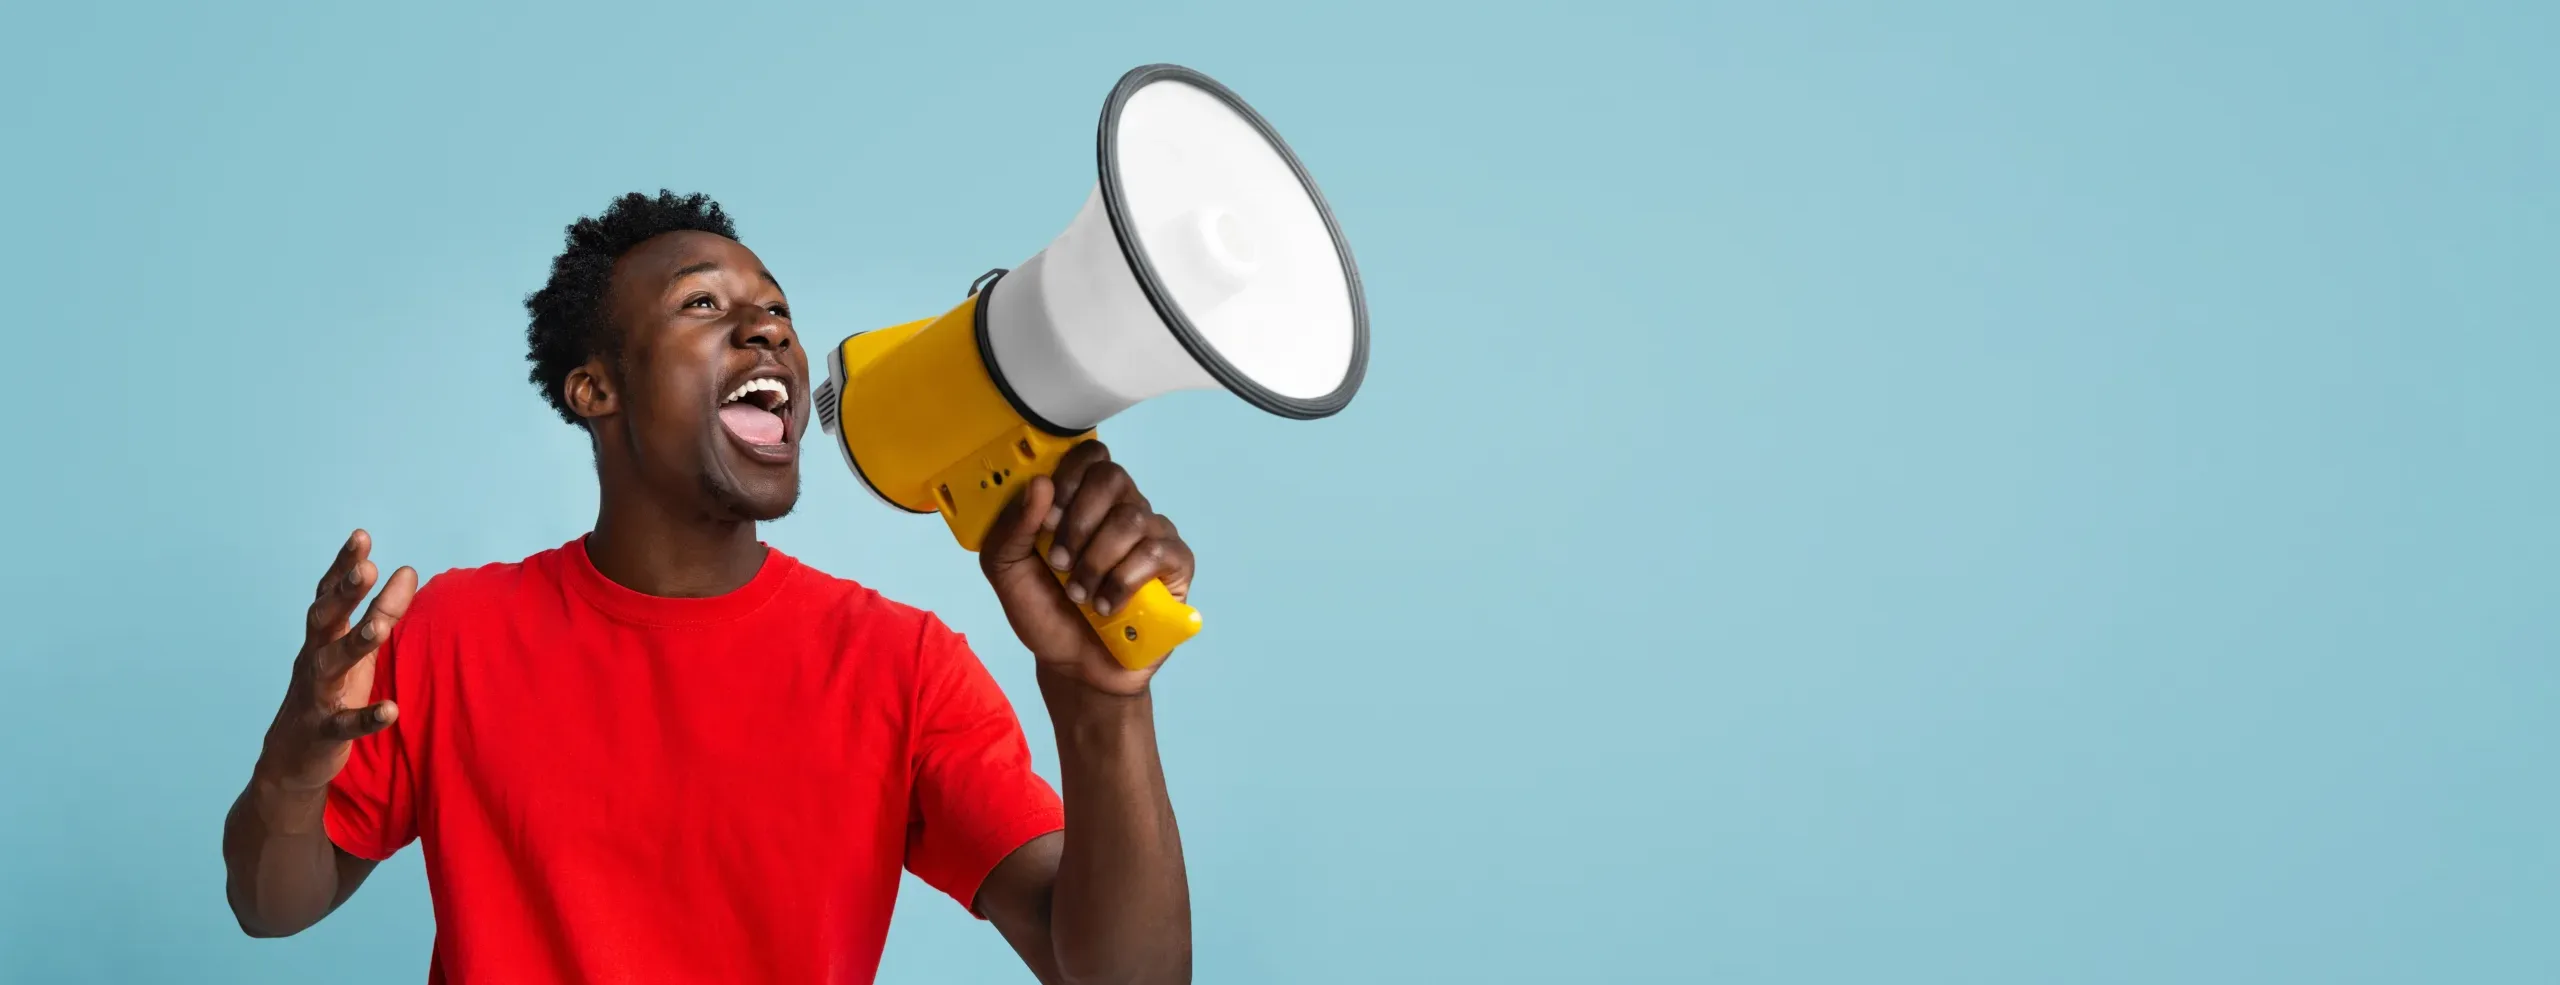 Emotional,Young,Black,Guy,Making,Announcement,With,Megaphone,In,Hands,